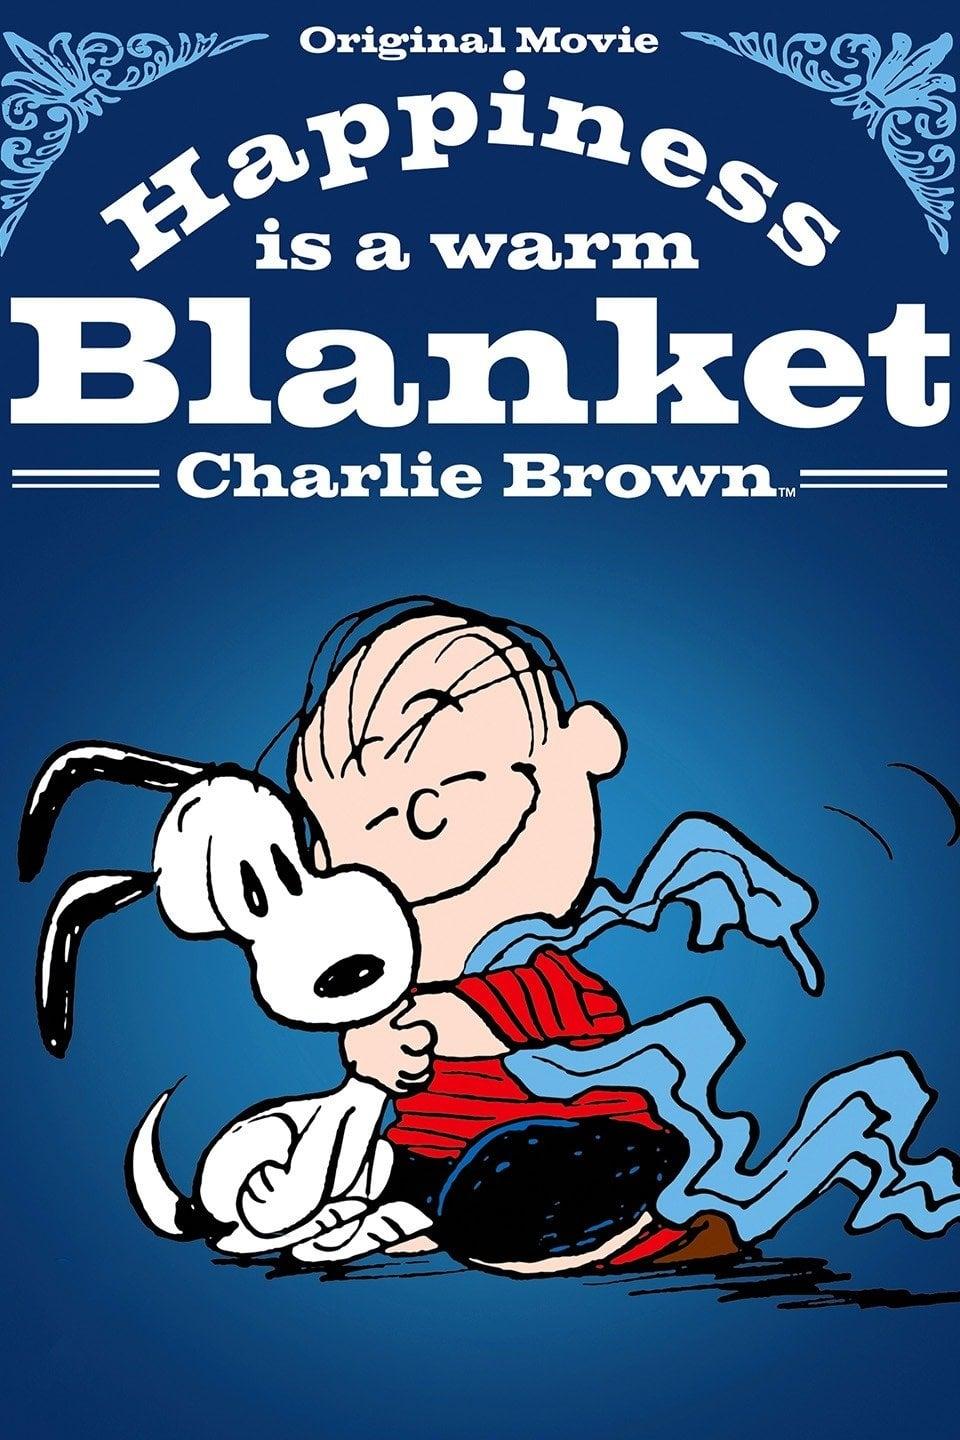 Happiness Is a Warm Blanket, Charlie Brown poster